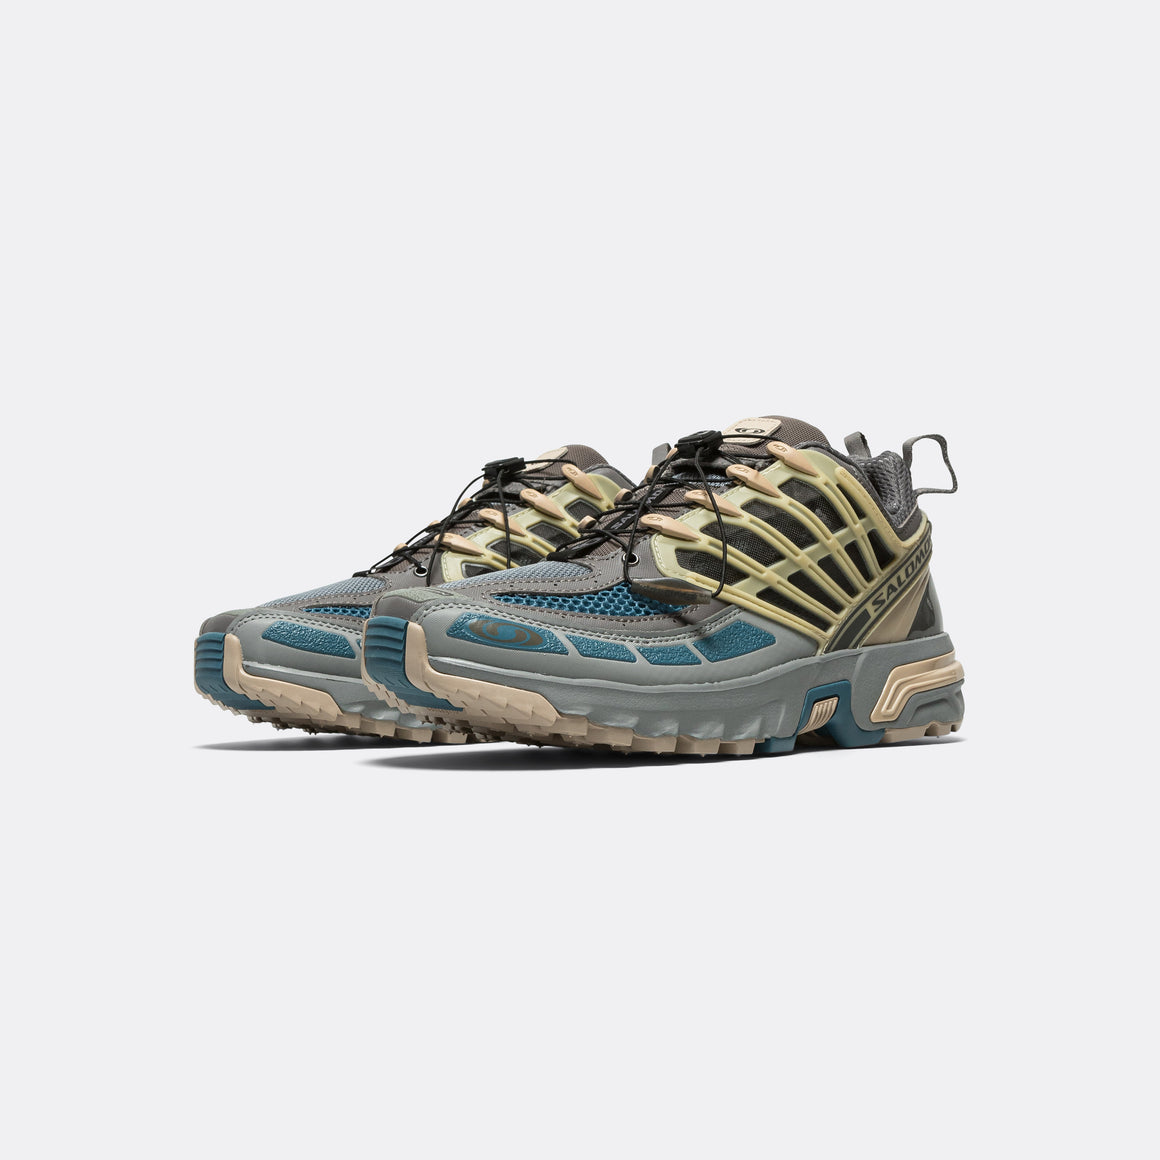 Salomon - ACS Pro - Pewter/Monument/Aegean Blue - UP THERE